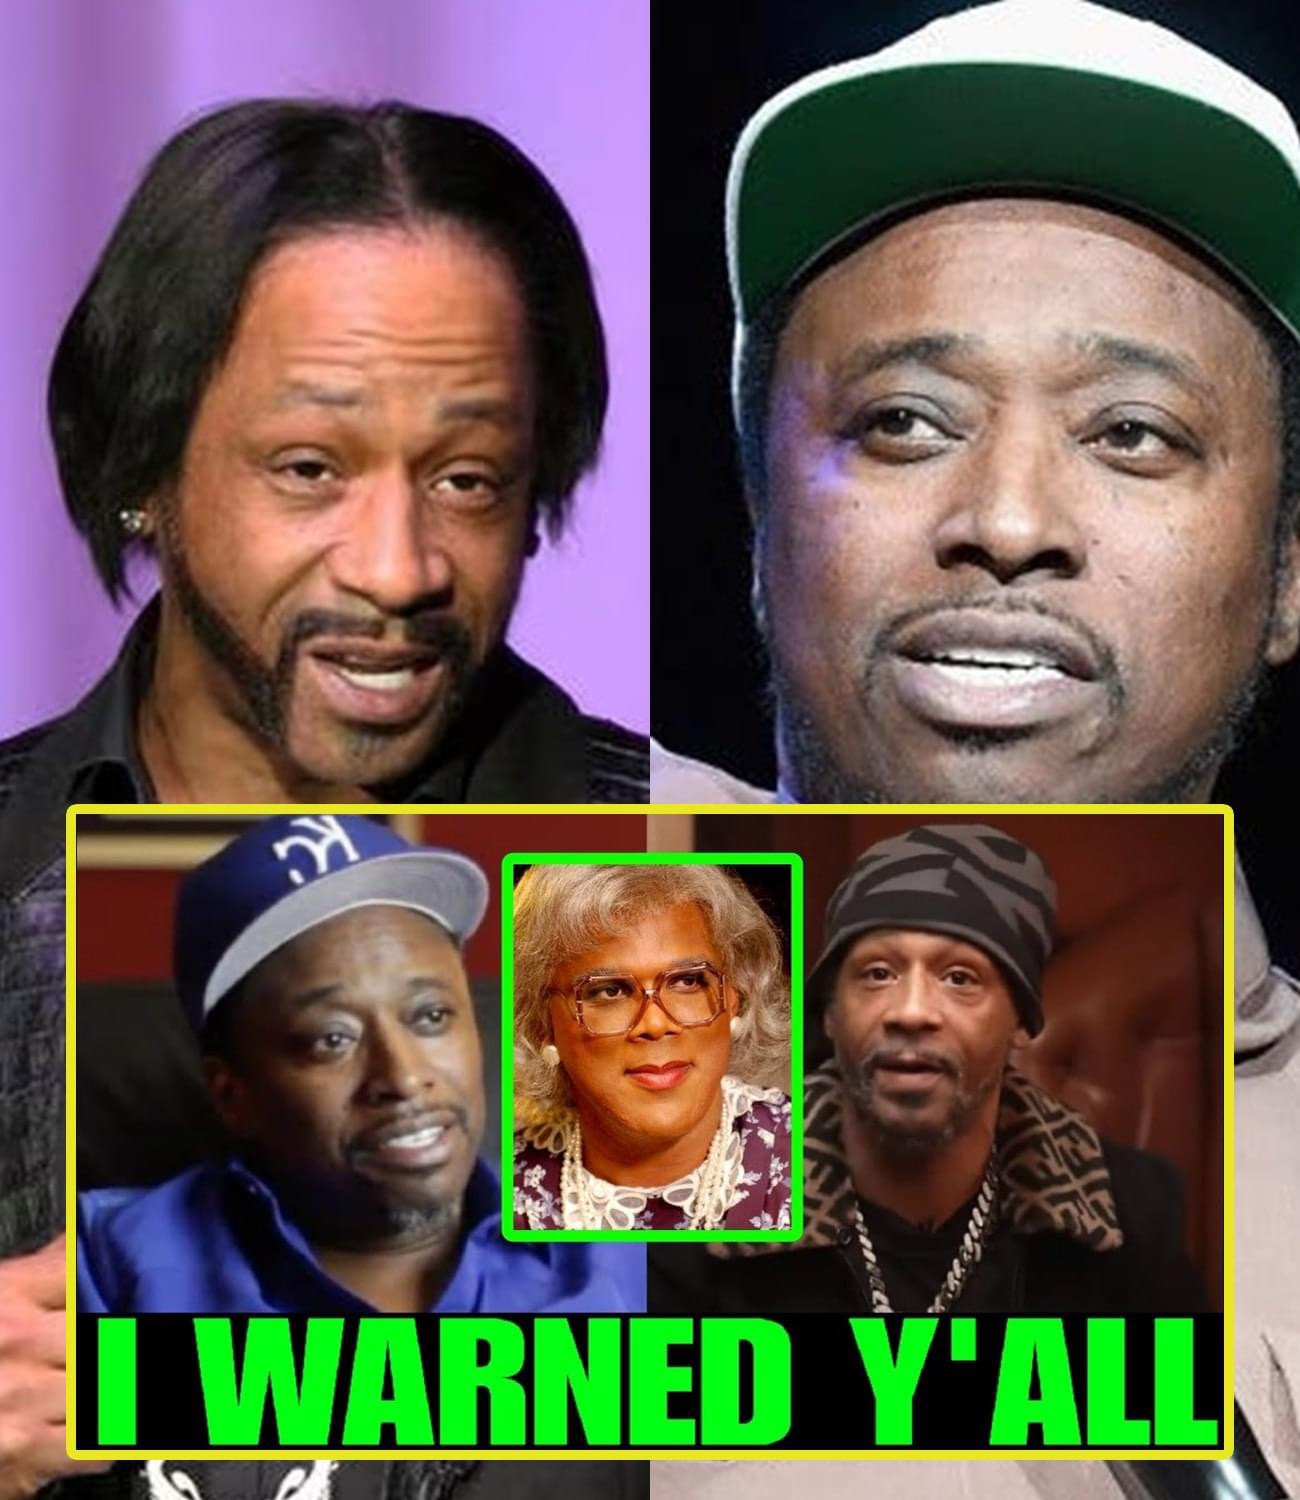 OMG Katt Williams proved Eddie Griffin was right all along about ” WEARING DRESS”